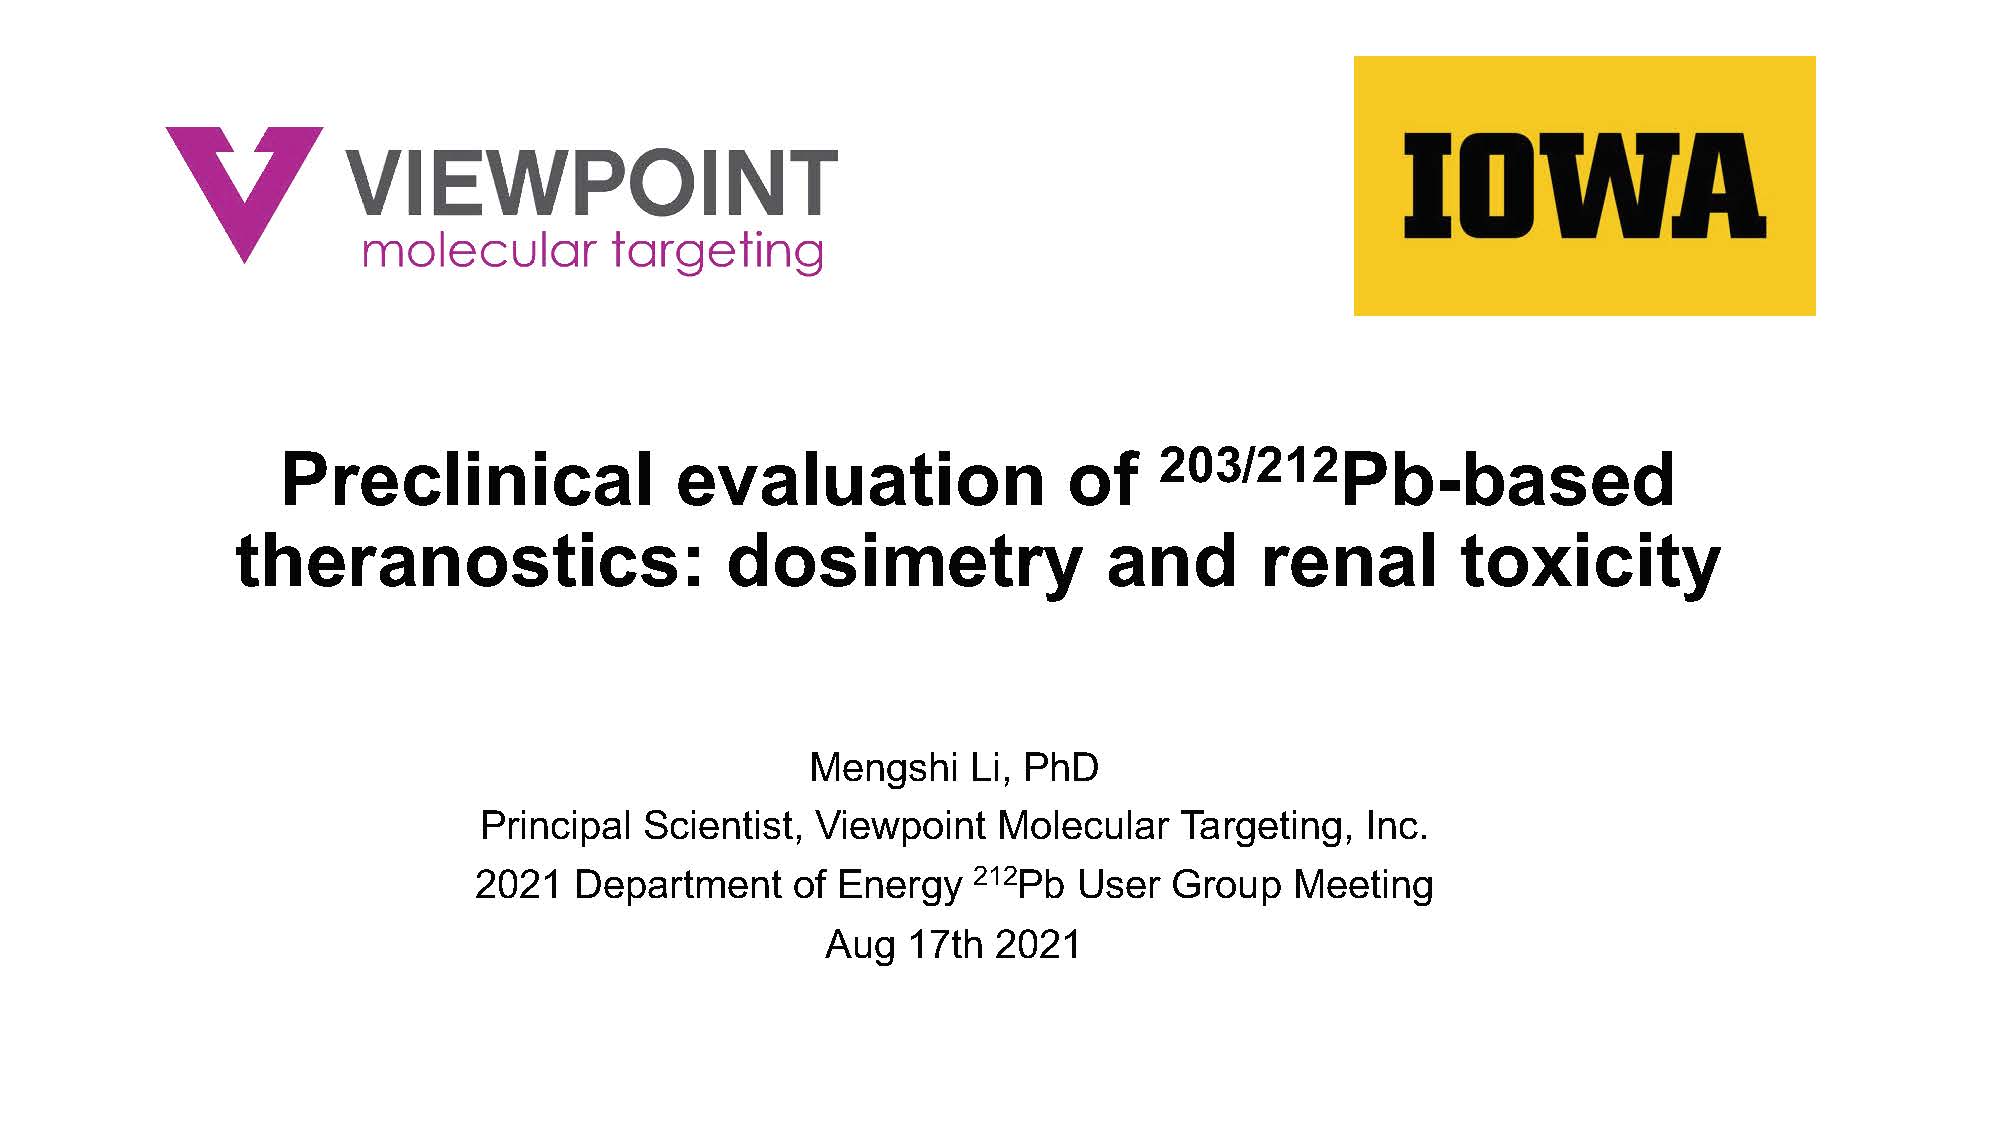 Preclinical Evaluation of Pb-212/203 Based Theranostics: Dosimetry and Renal Toxicity by Dr. Mengshi Li, Viewpoint